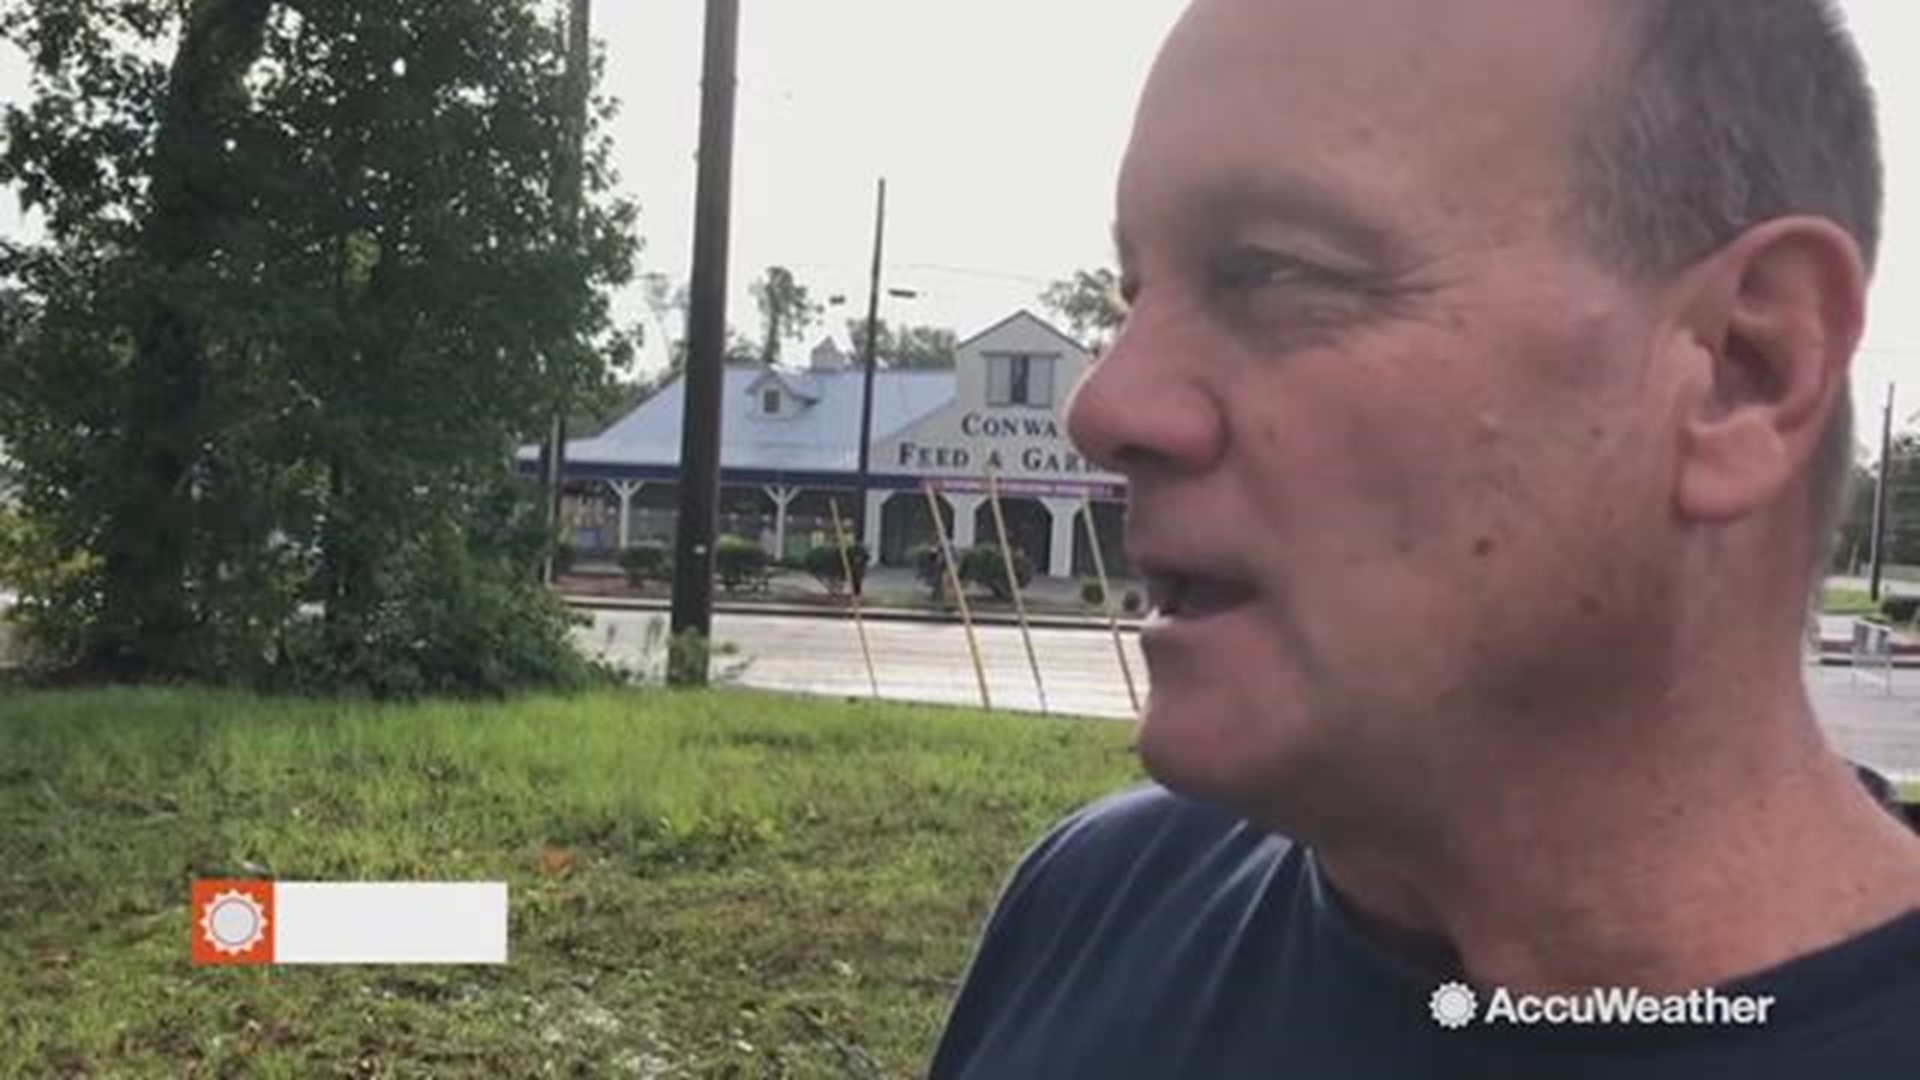  Florence has caused major flooding that closed roads and inundated buildings, but heroes continue to emerge to help those in need.